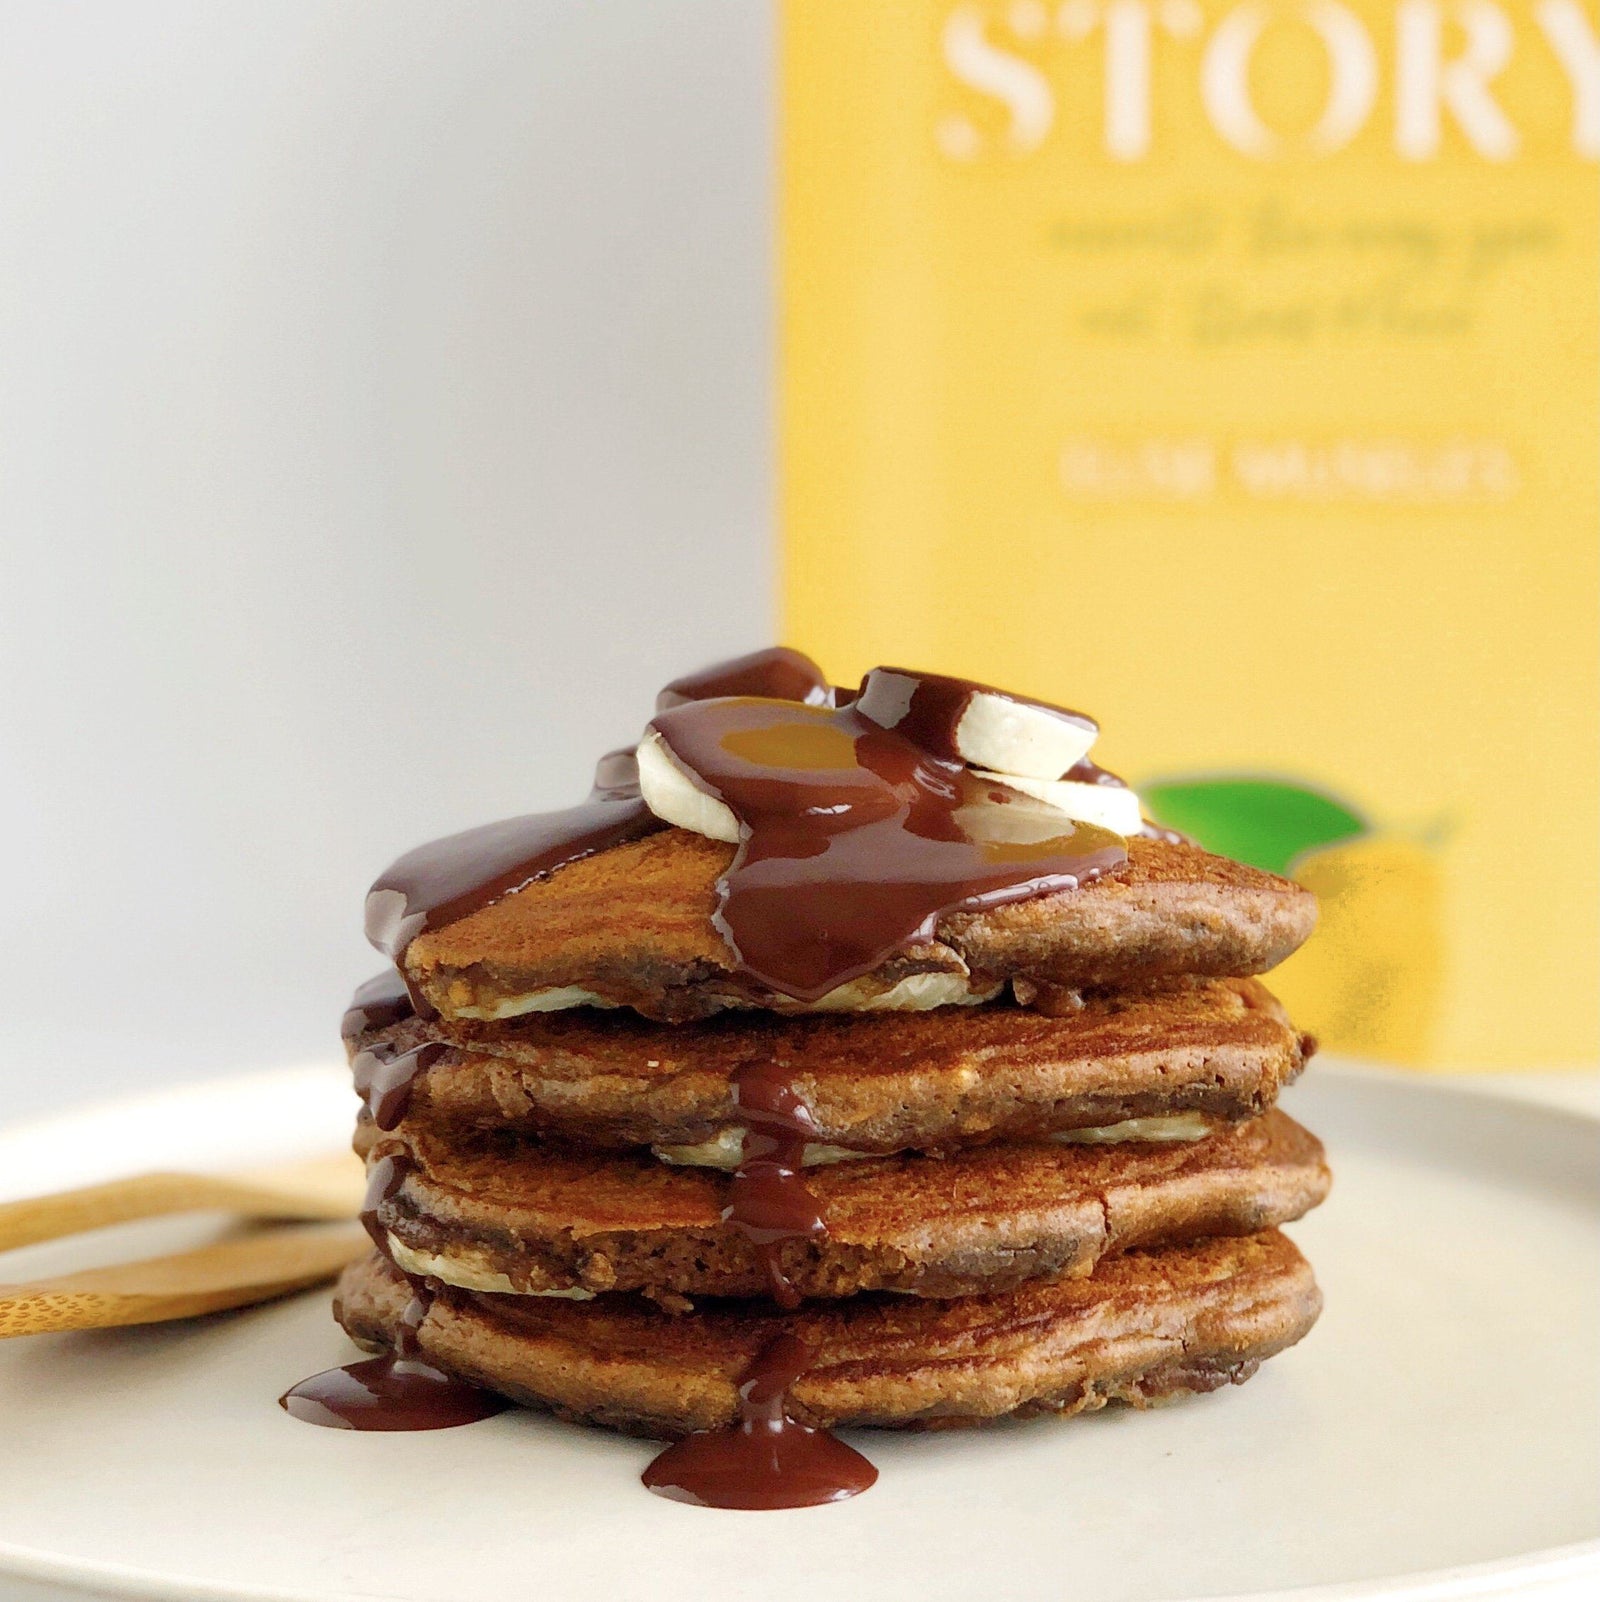 Recipe for Oaty Pancakes with Banana Coins from Food Story by Elise Museles